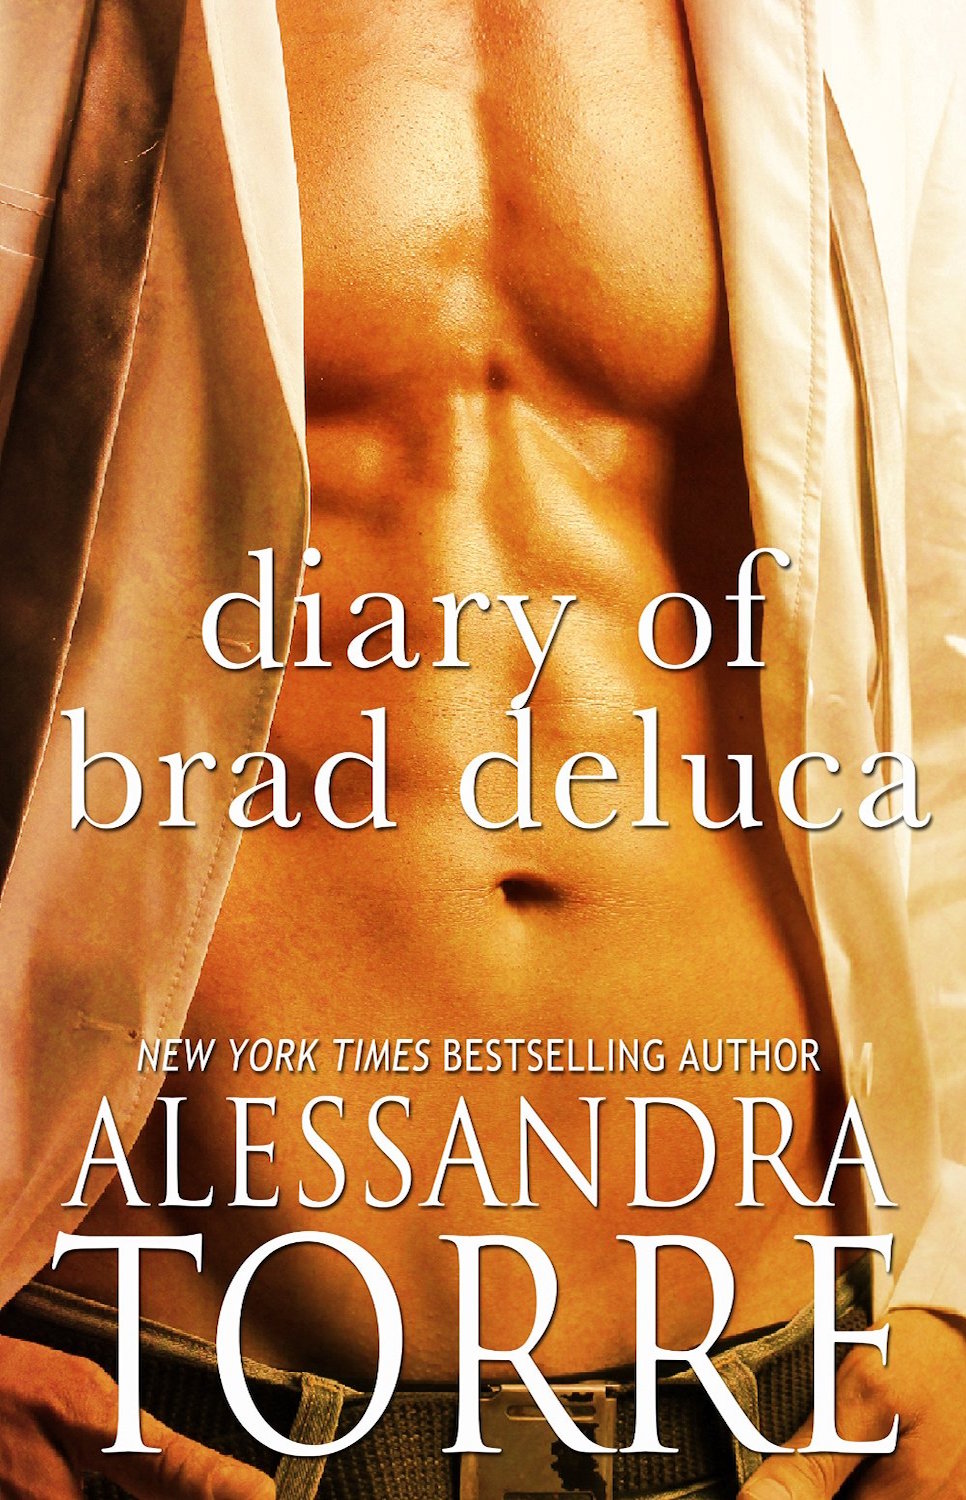 Review: Blindfolded Innocence by Alessandra Torre (8/10 Stars)